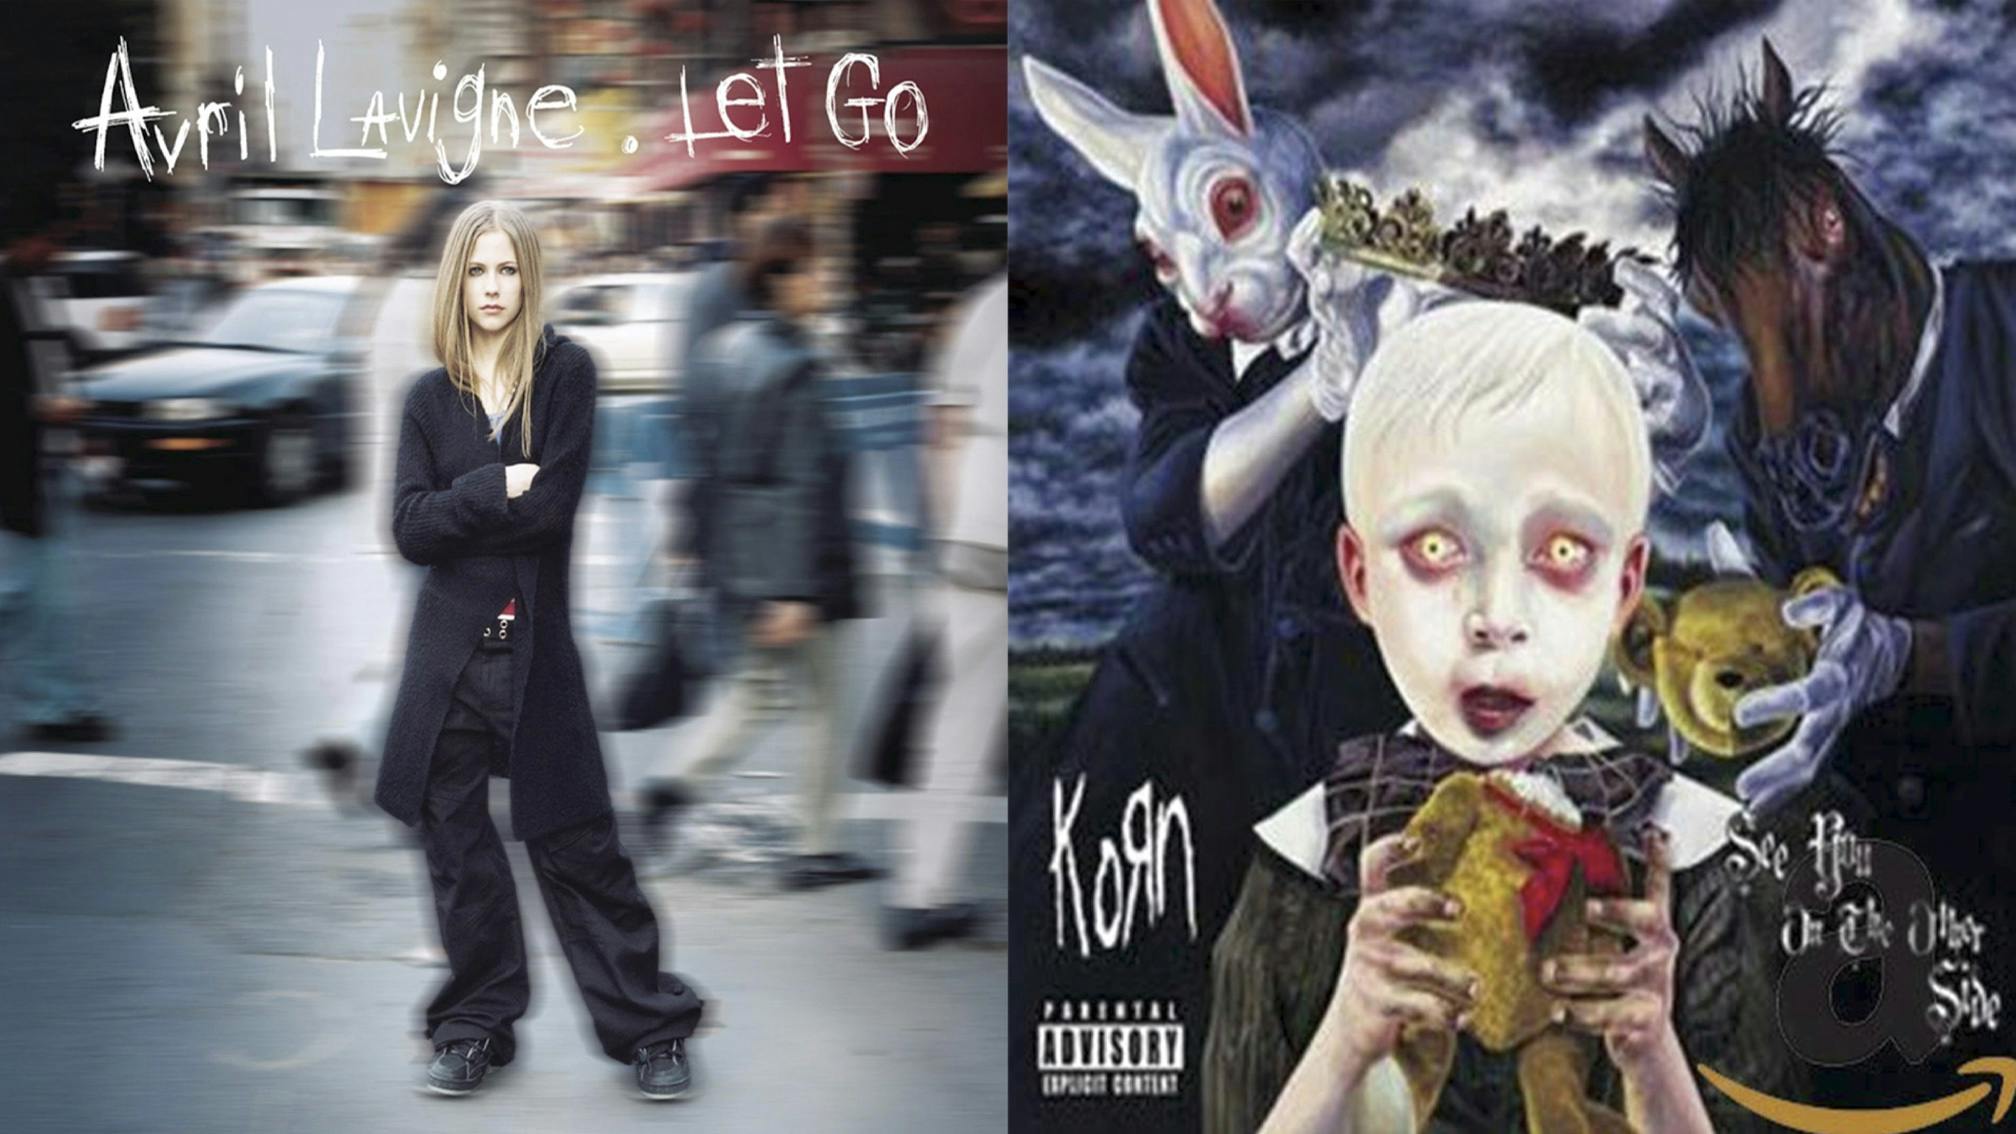 This Avril Lavigne x Korn Mash-Up Is Actually Pretty Badass